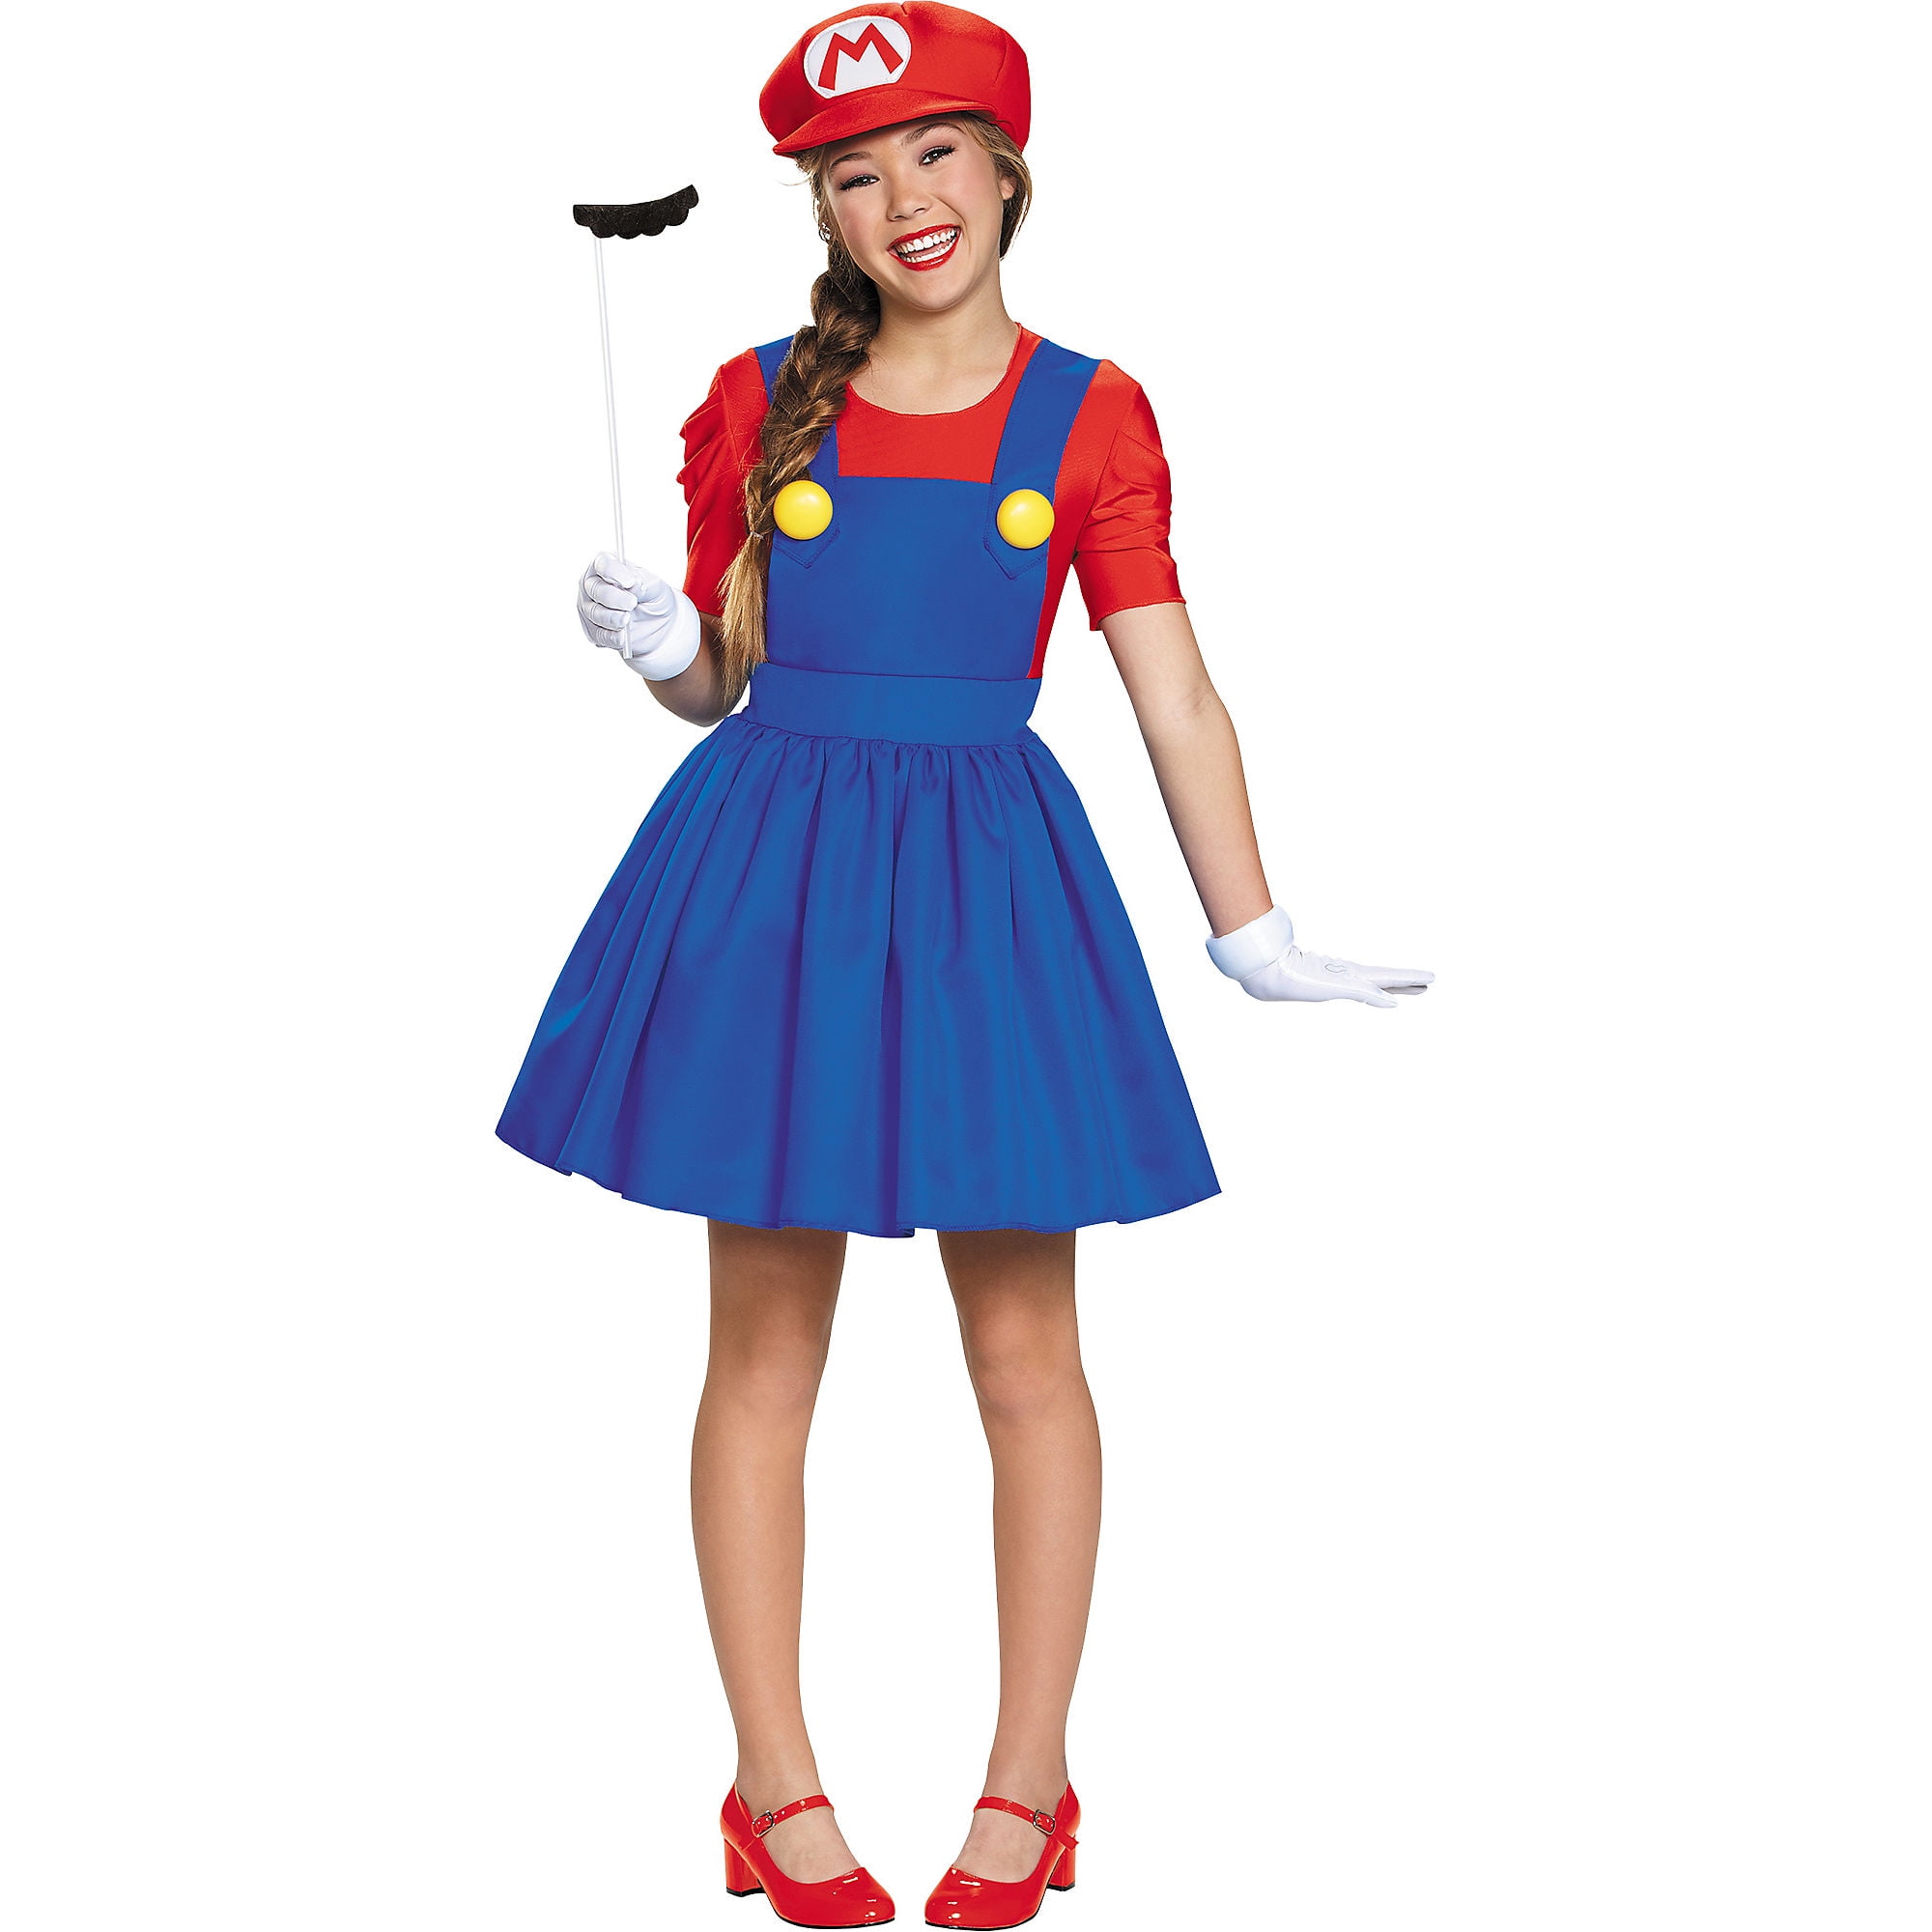 Childrens Kids Plumber Girl Fancy Dress Costume Mario Brothers Oufit 6-10 Yrs 